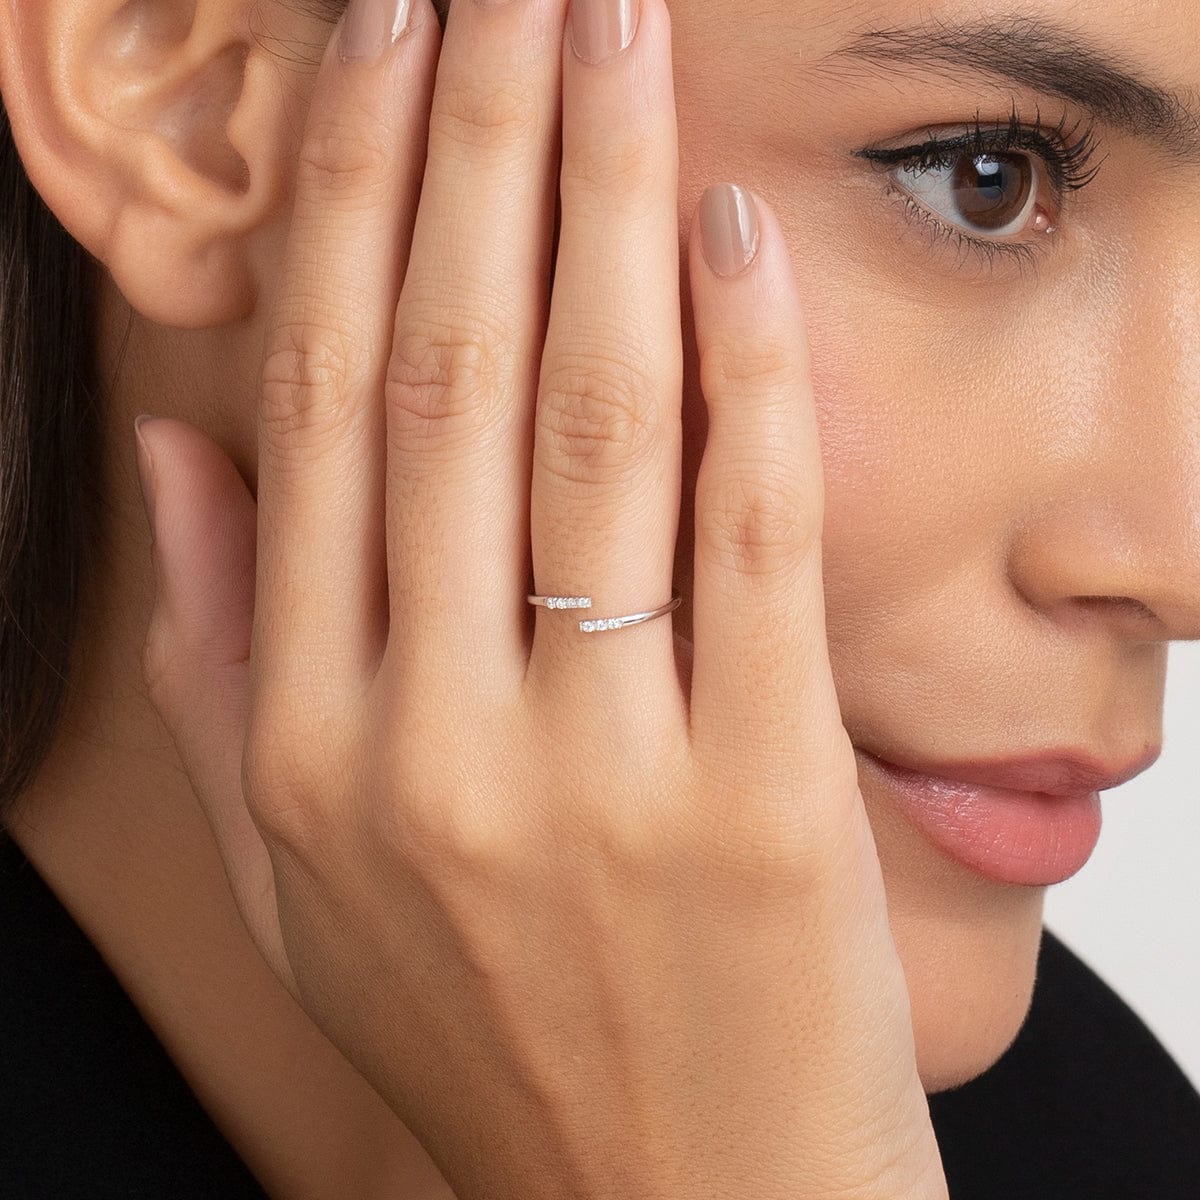 Thin + Simple Solitaire With Elongated Radiant Cut | Good Stone - GOODSTONE